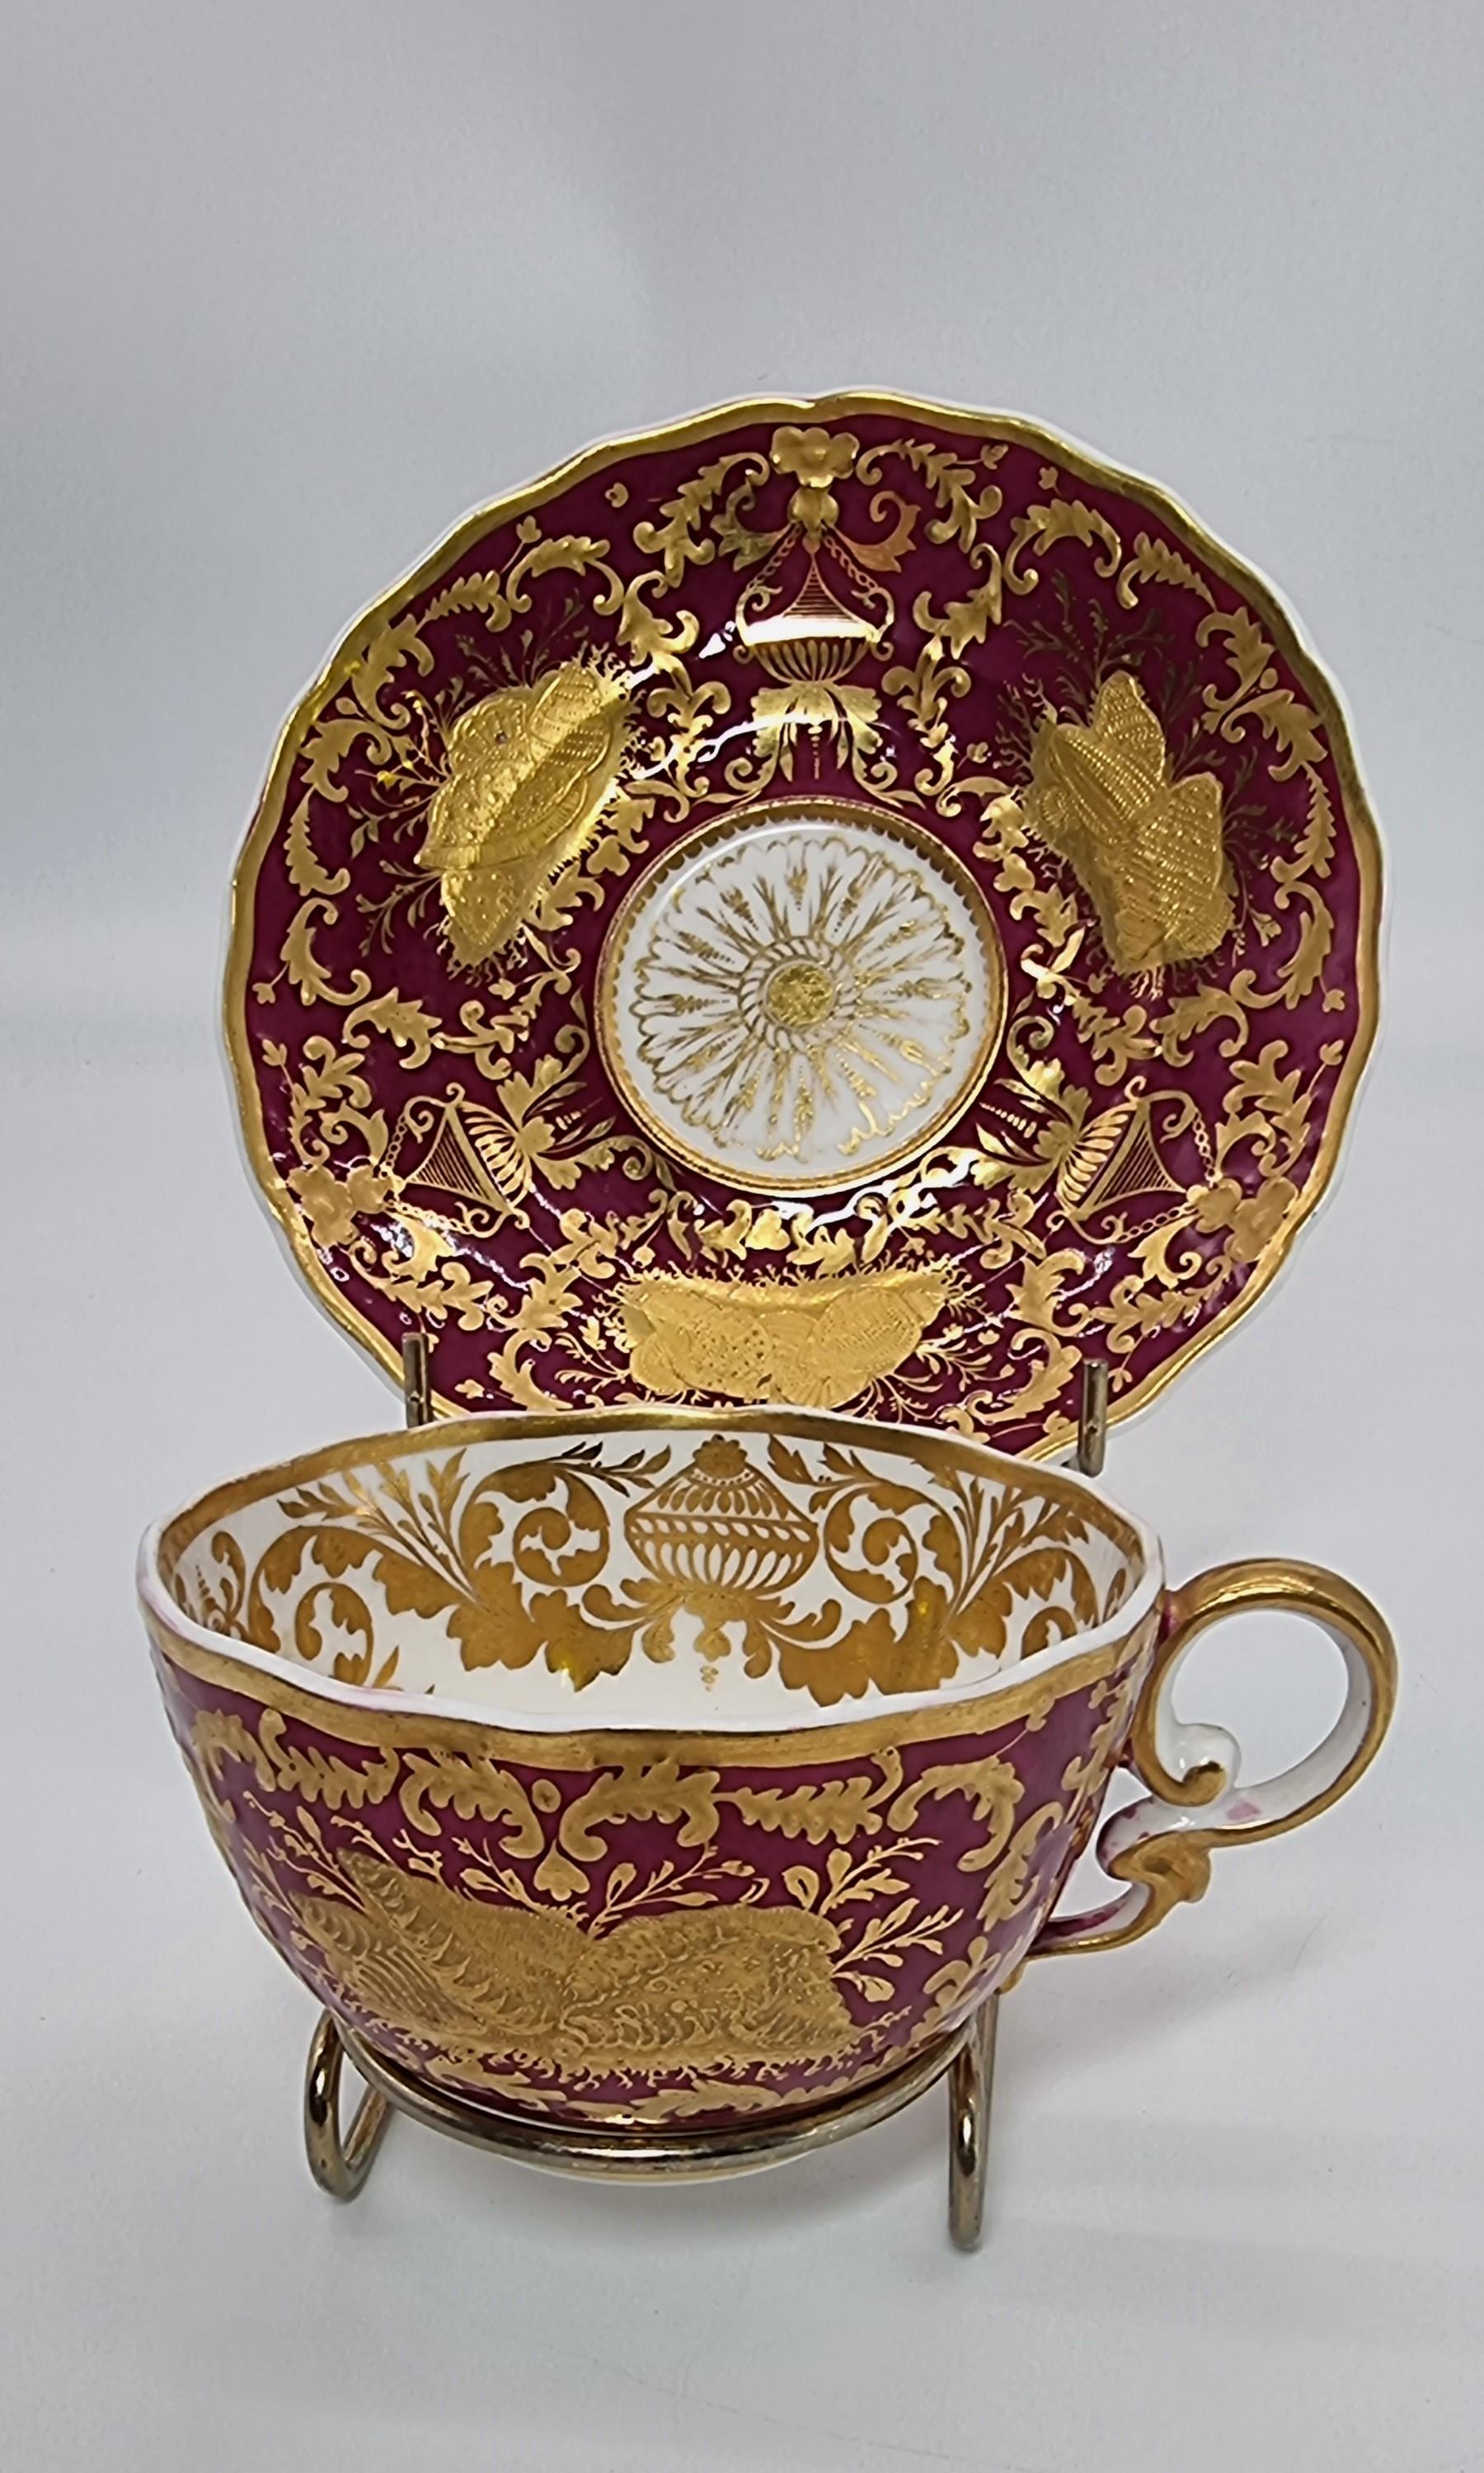 An exquisite and rare early 19th century Spode cabinet cup and saucer.
This beautiful and richly decorated Spode cabinet cup and saucer were made at this high quality English porcelain factory, Circa 1830.  It has a deep plum red ground with a white